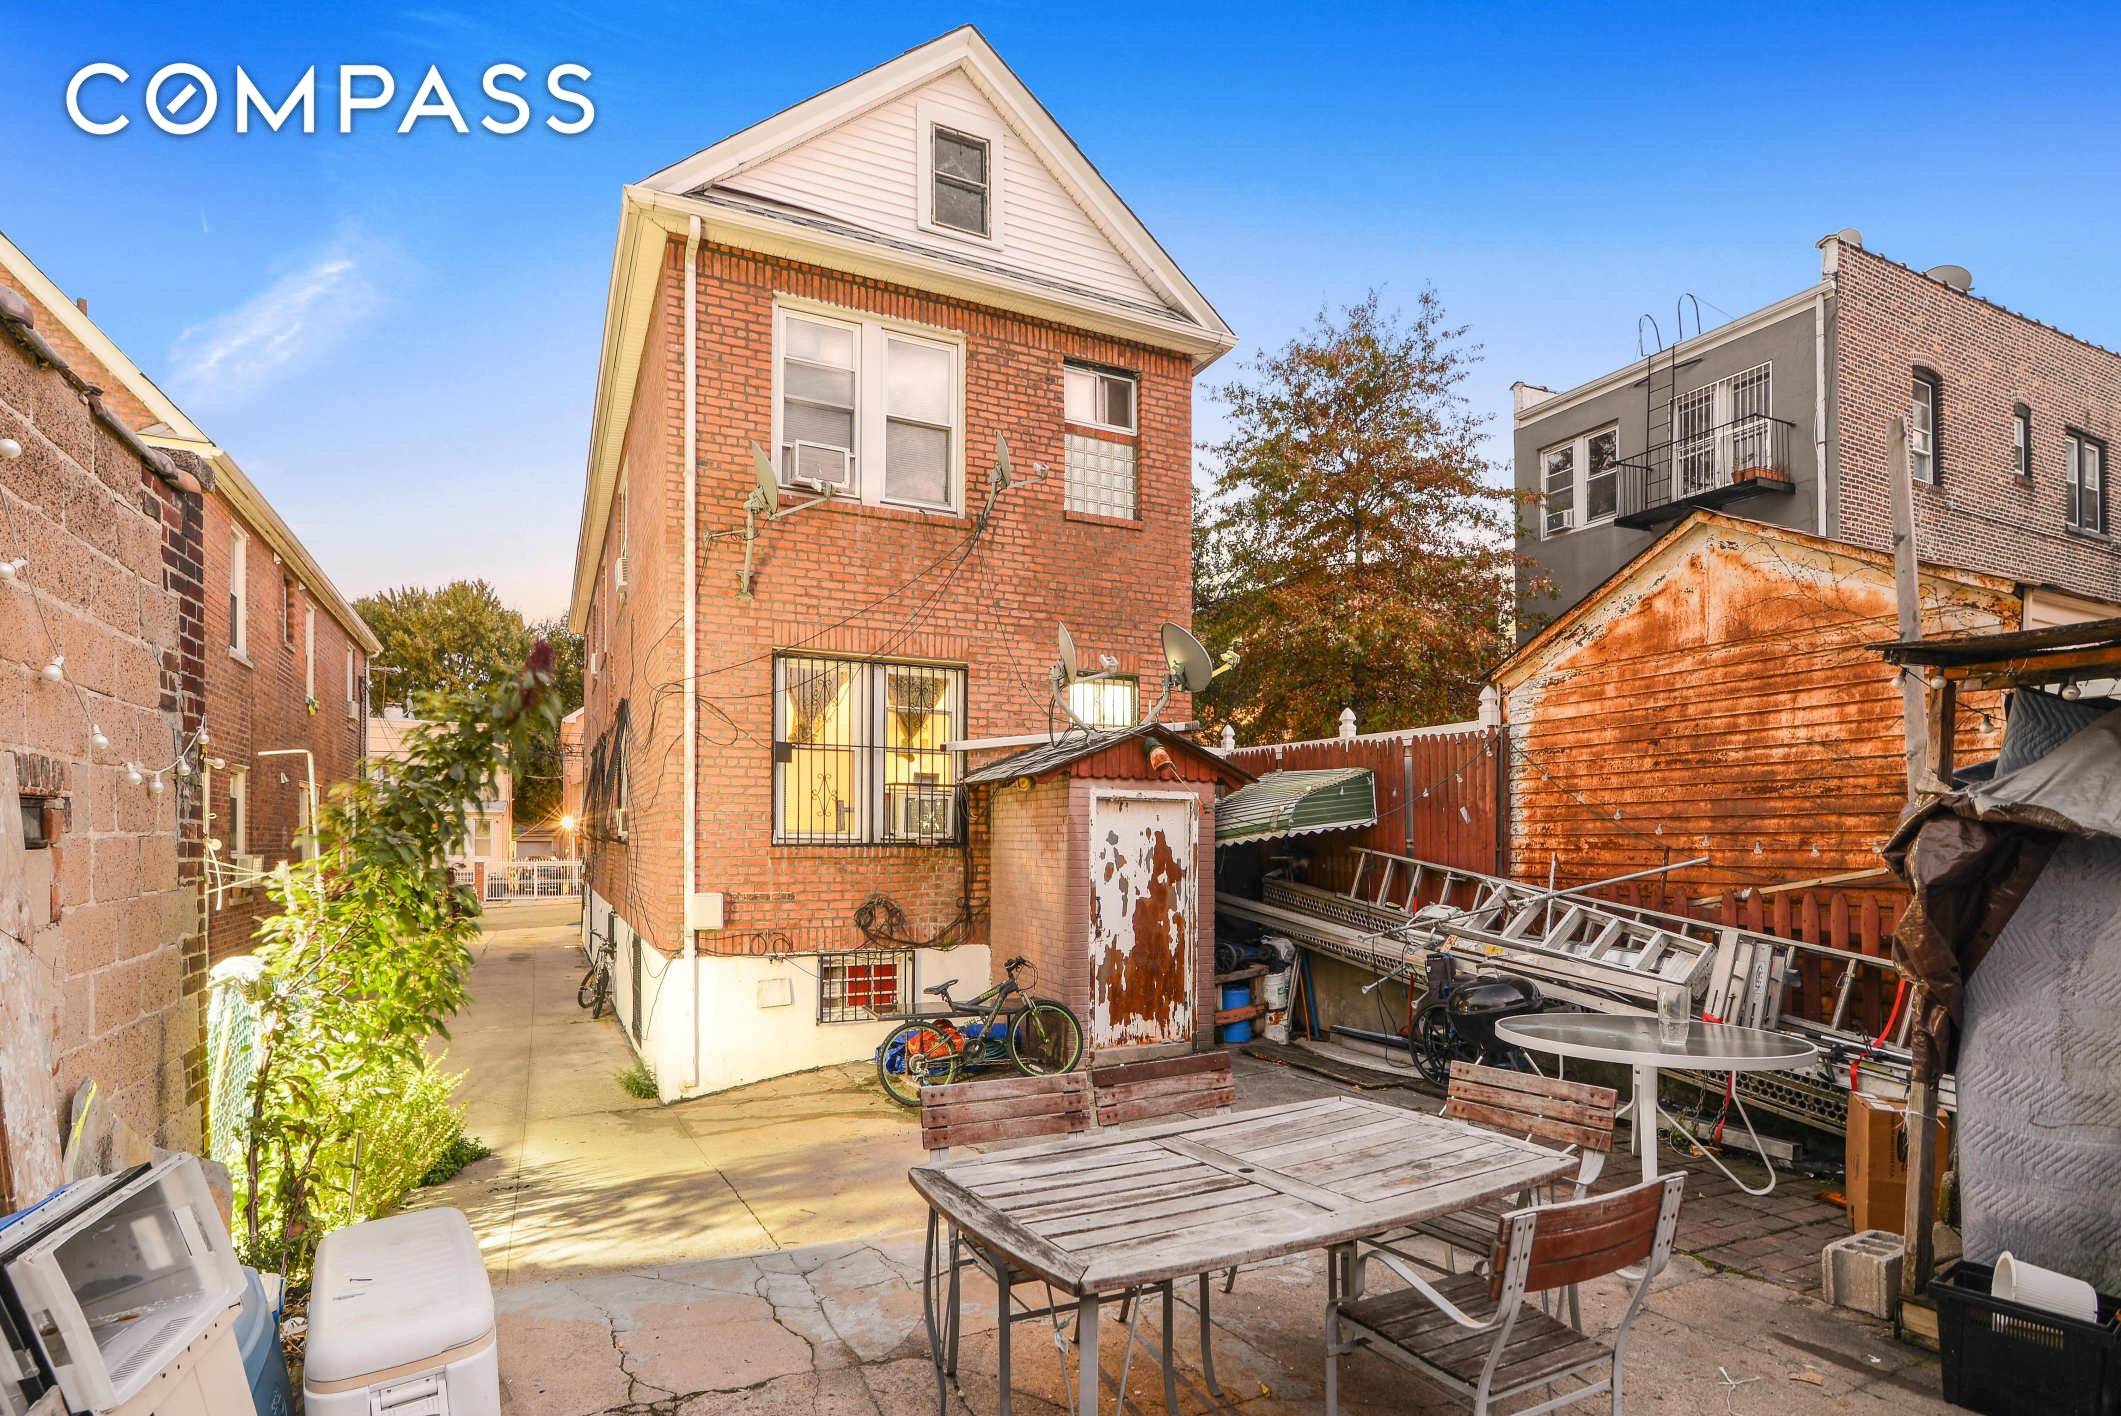 2 Family detached Brick home in the heart of Woodside.